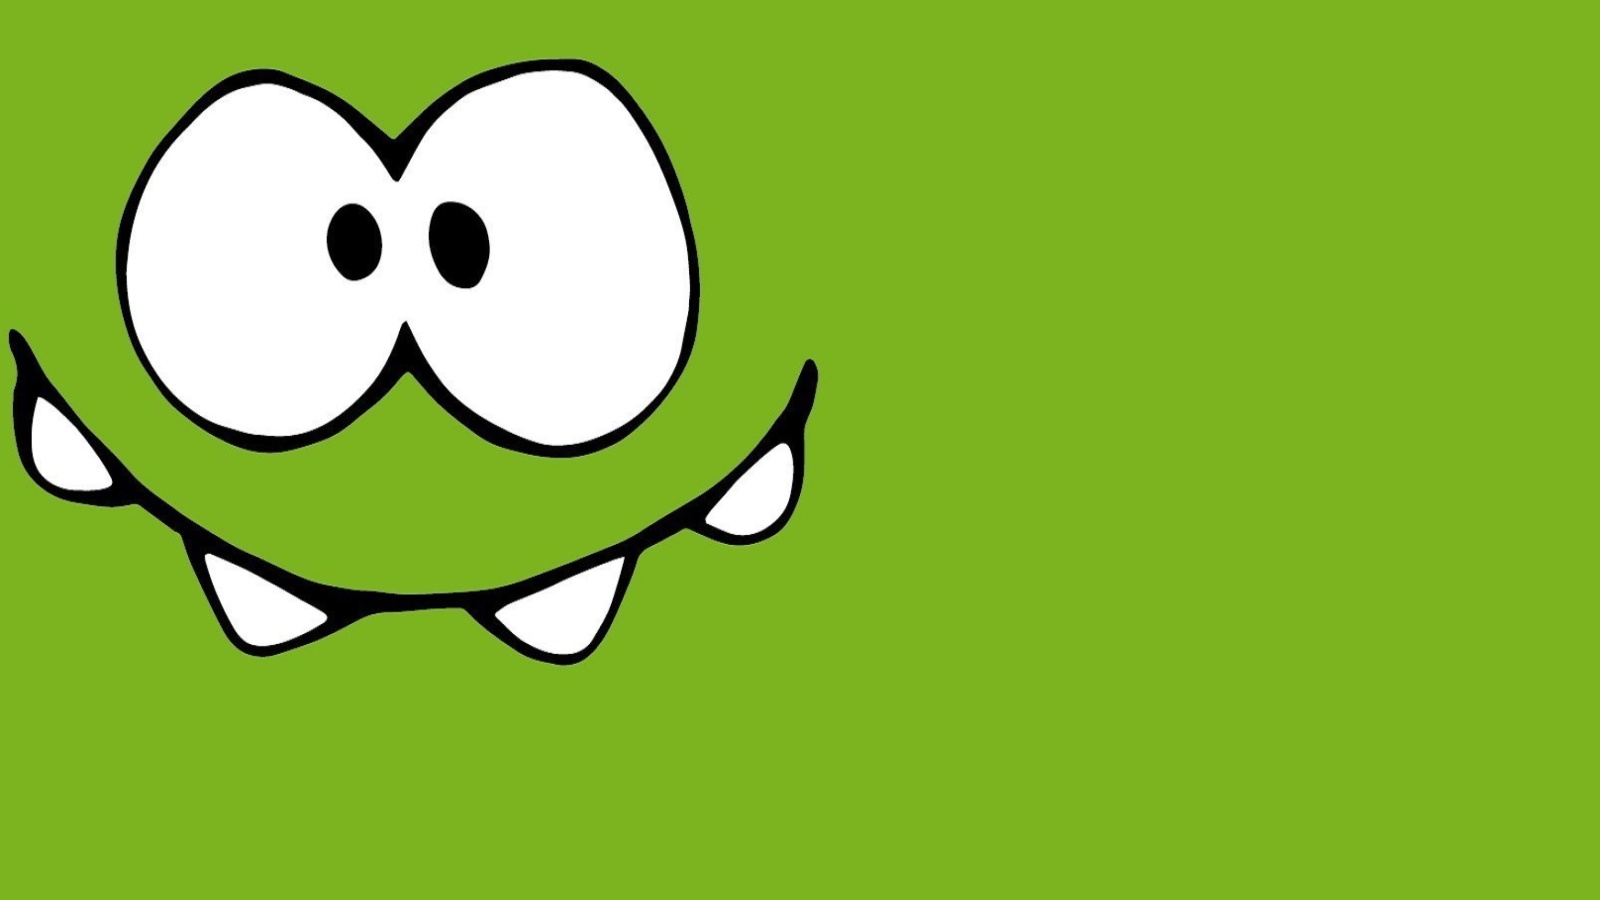 Om Nom from game Cut the Rope screenshot #1 1600x900